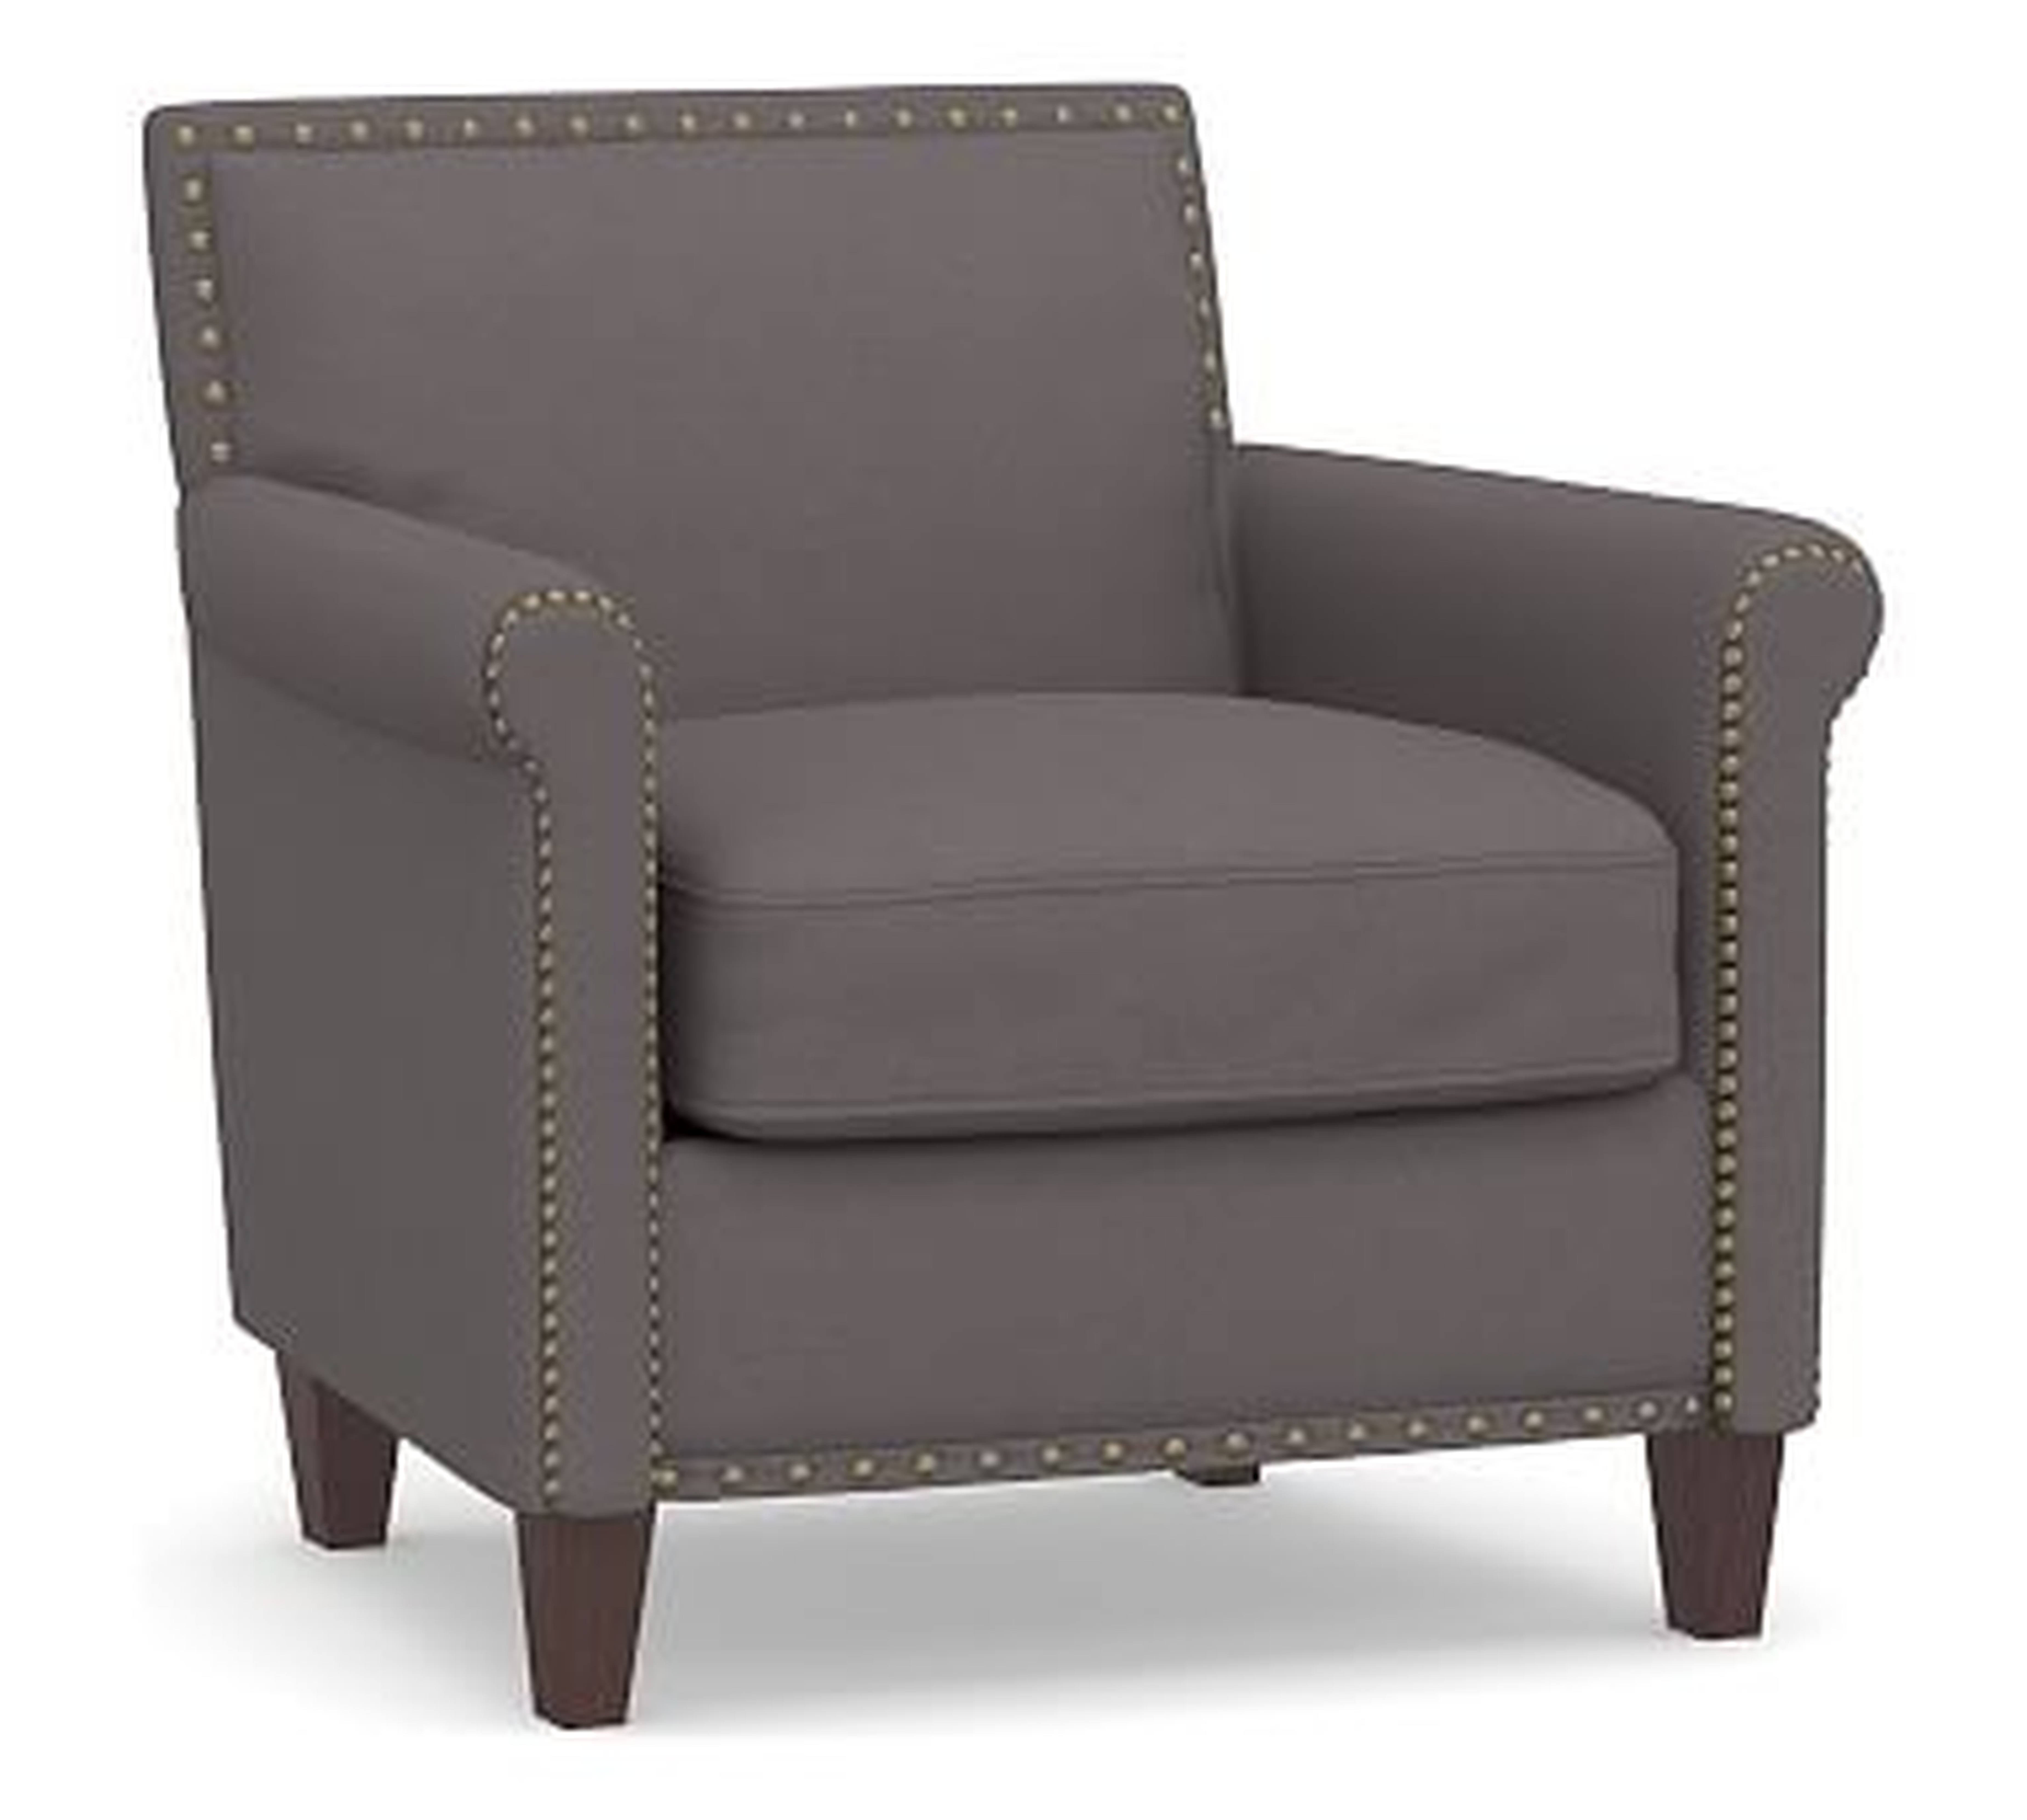 SoMa Roscoe Upholstered Tufted Armchair, Polyester Wrapped Cushions, Washed Canvas Graphite - Pottery Barn